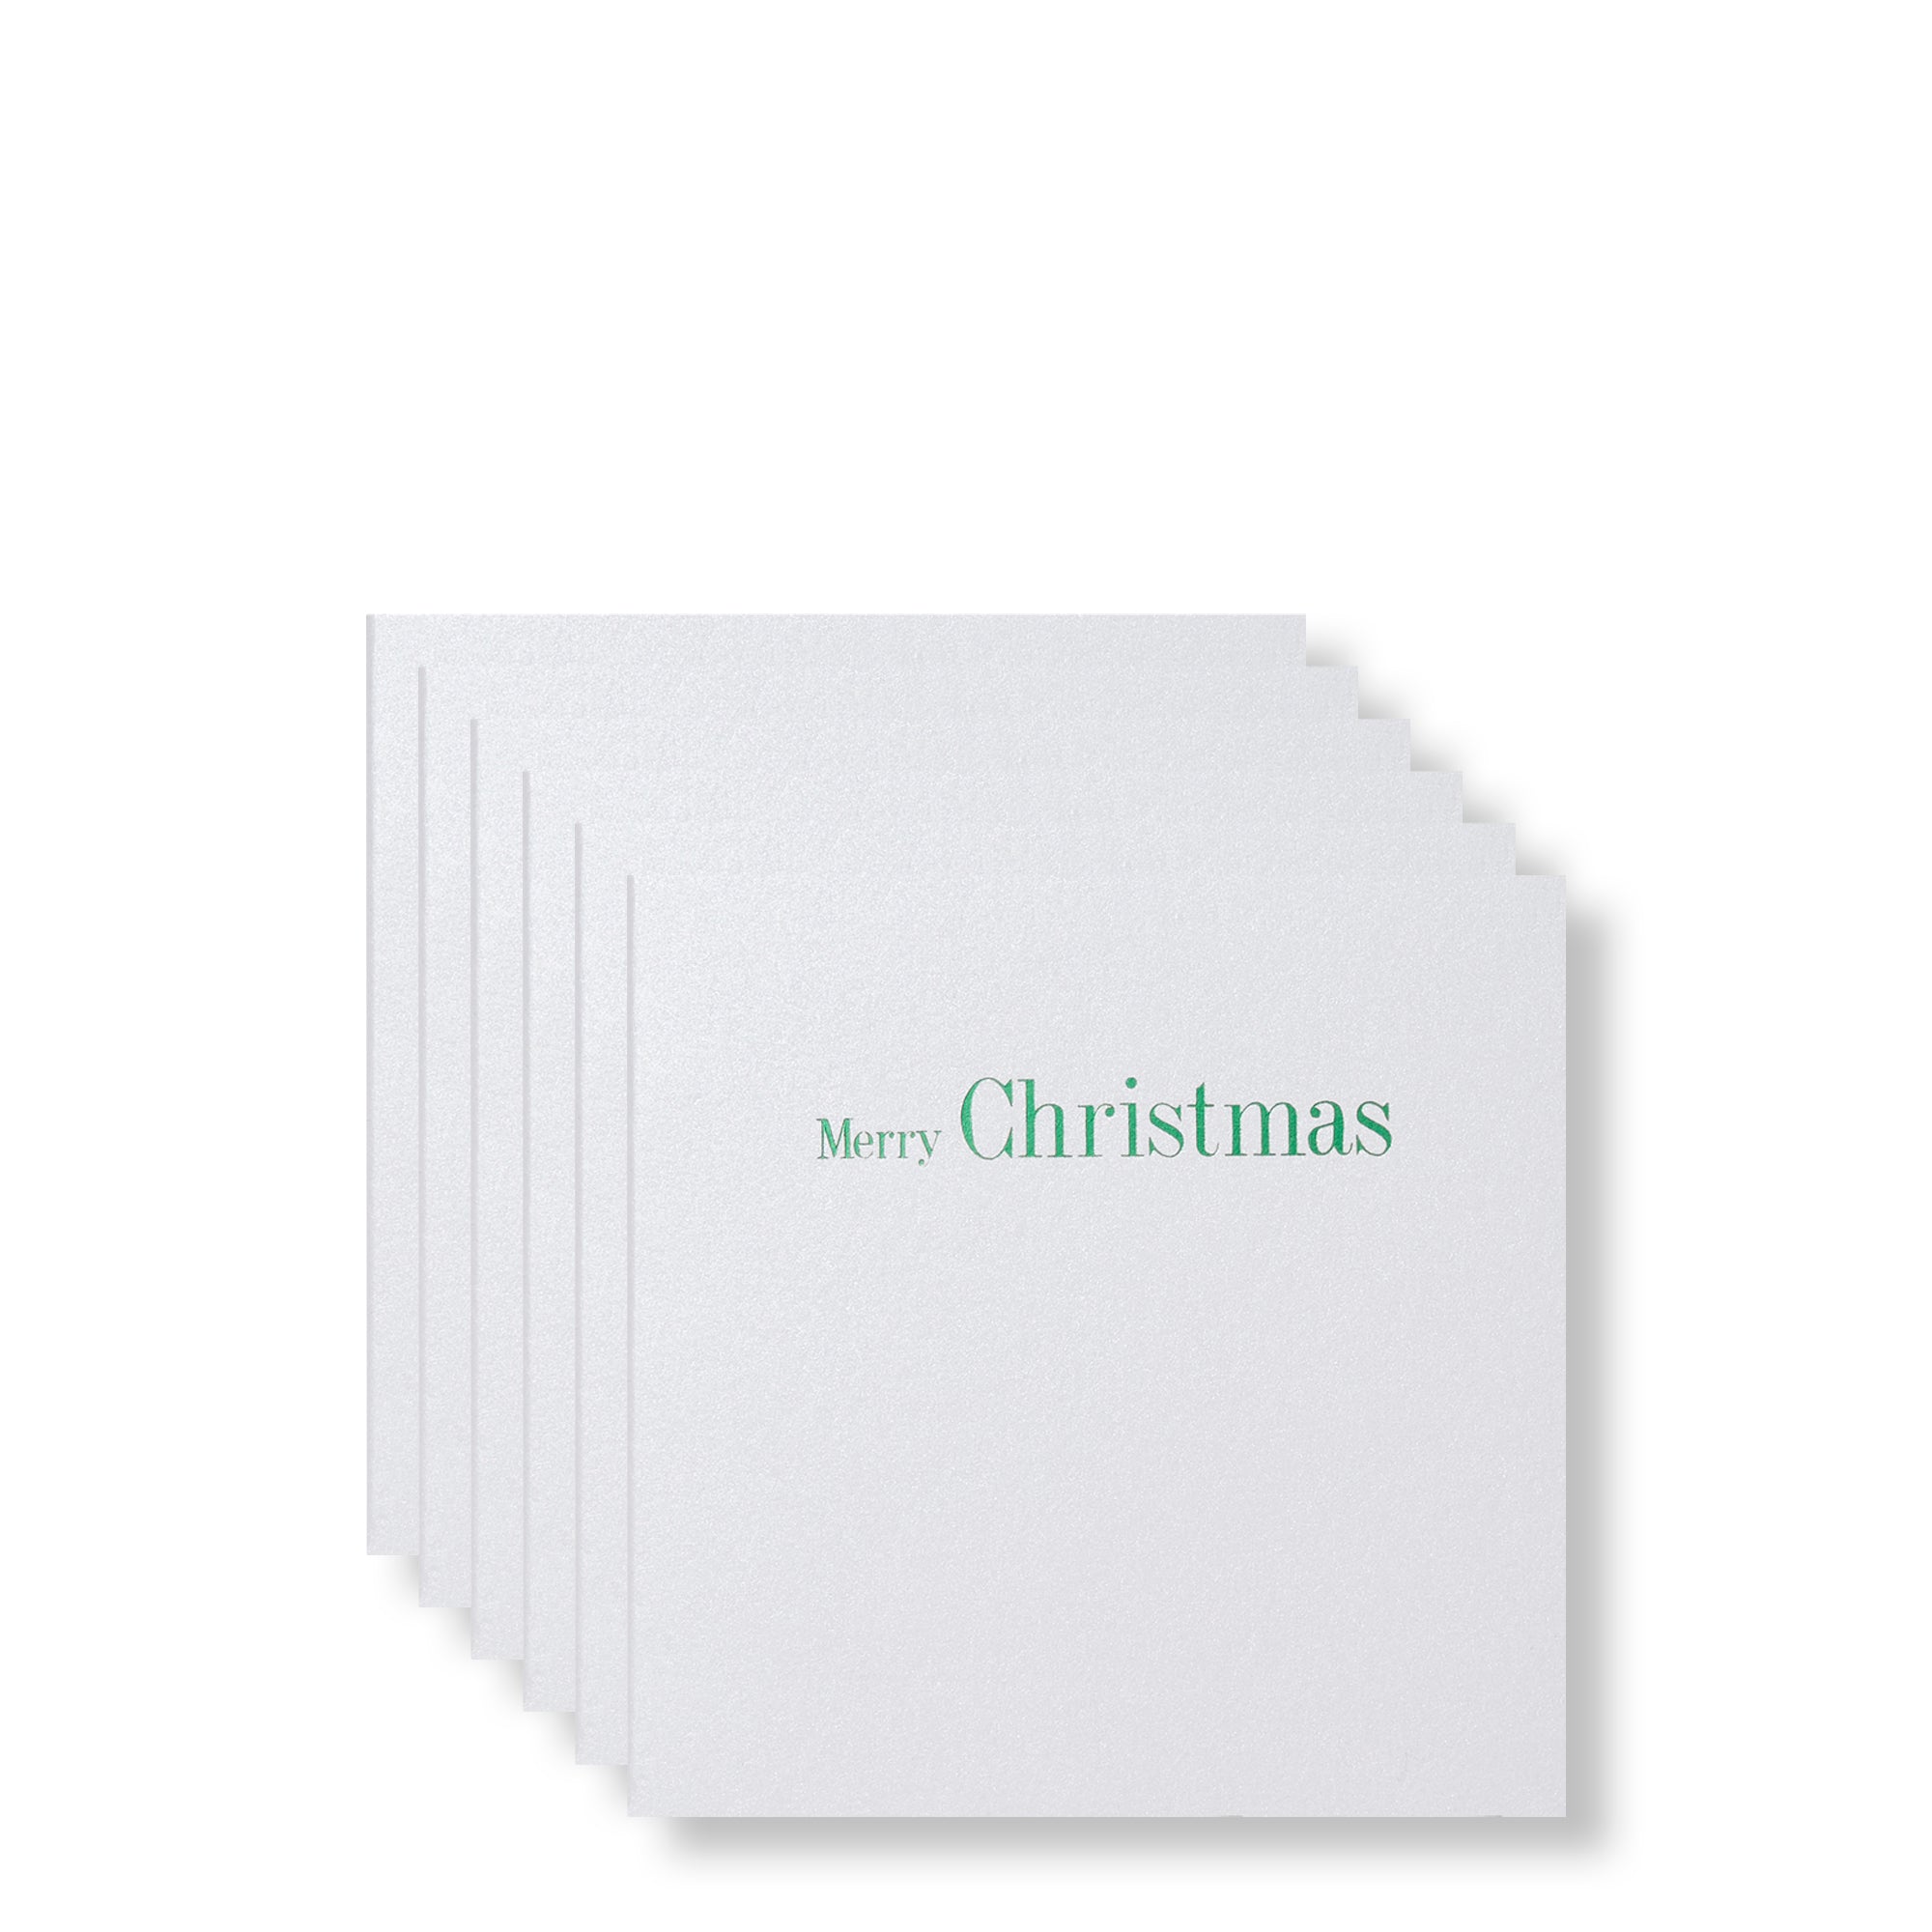 Merry Christmas Green Foiled Mini Cards, Set of 6